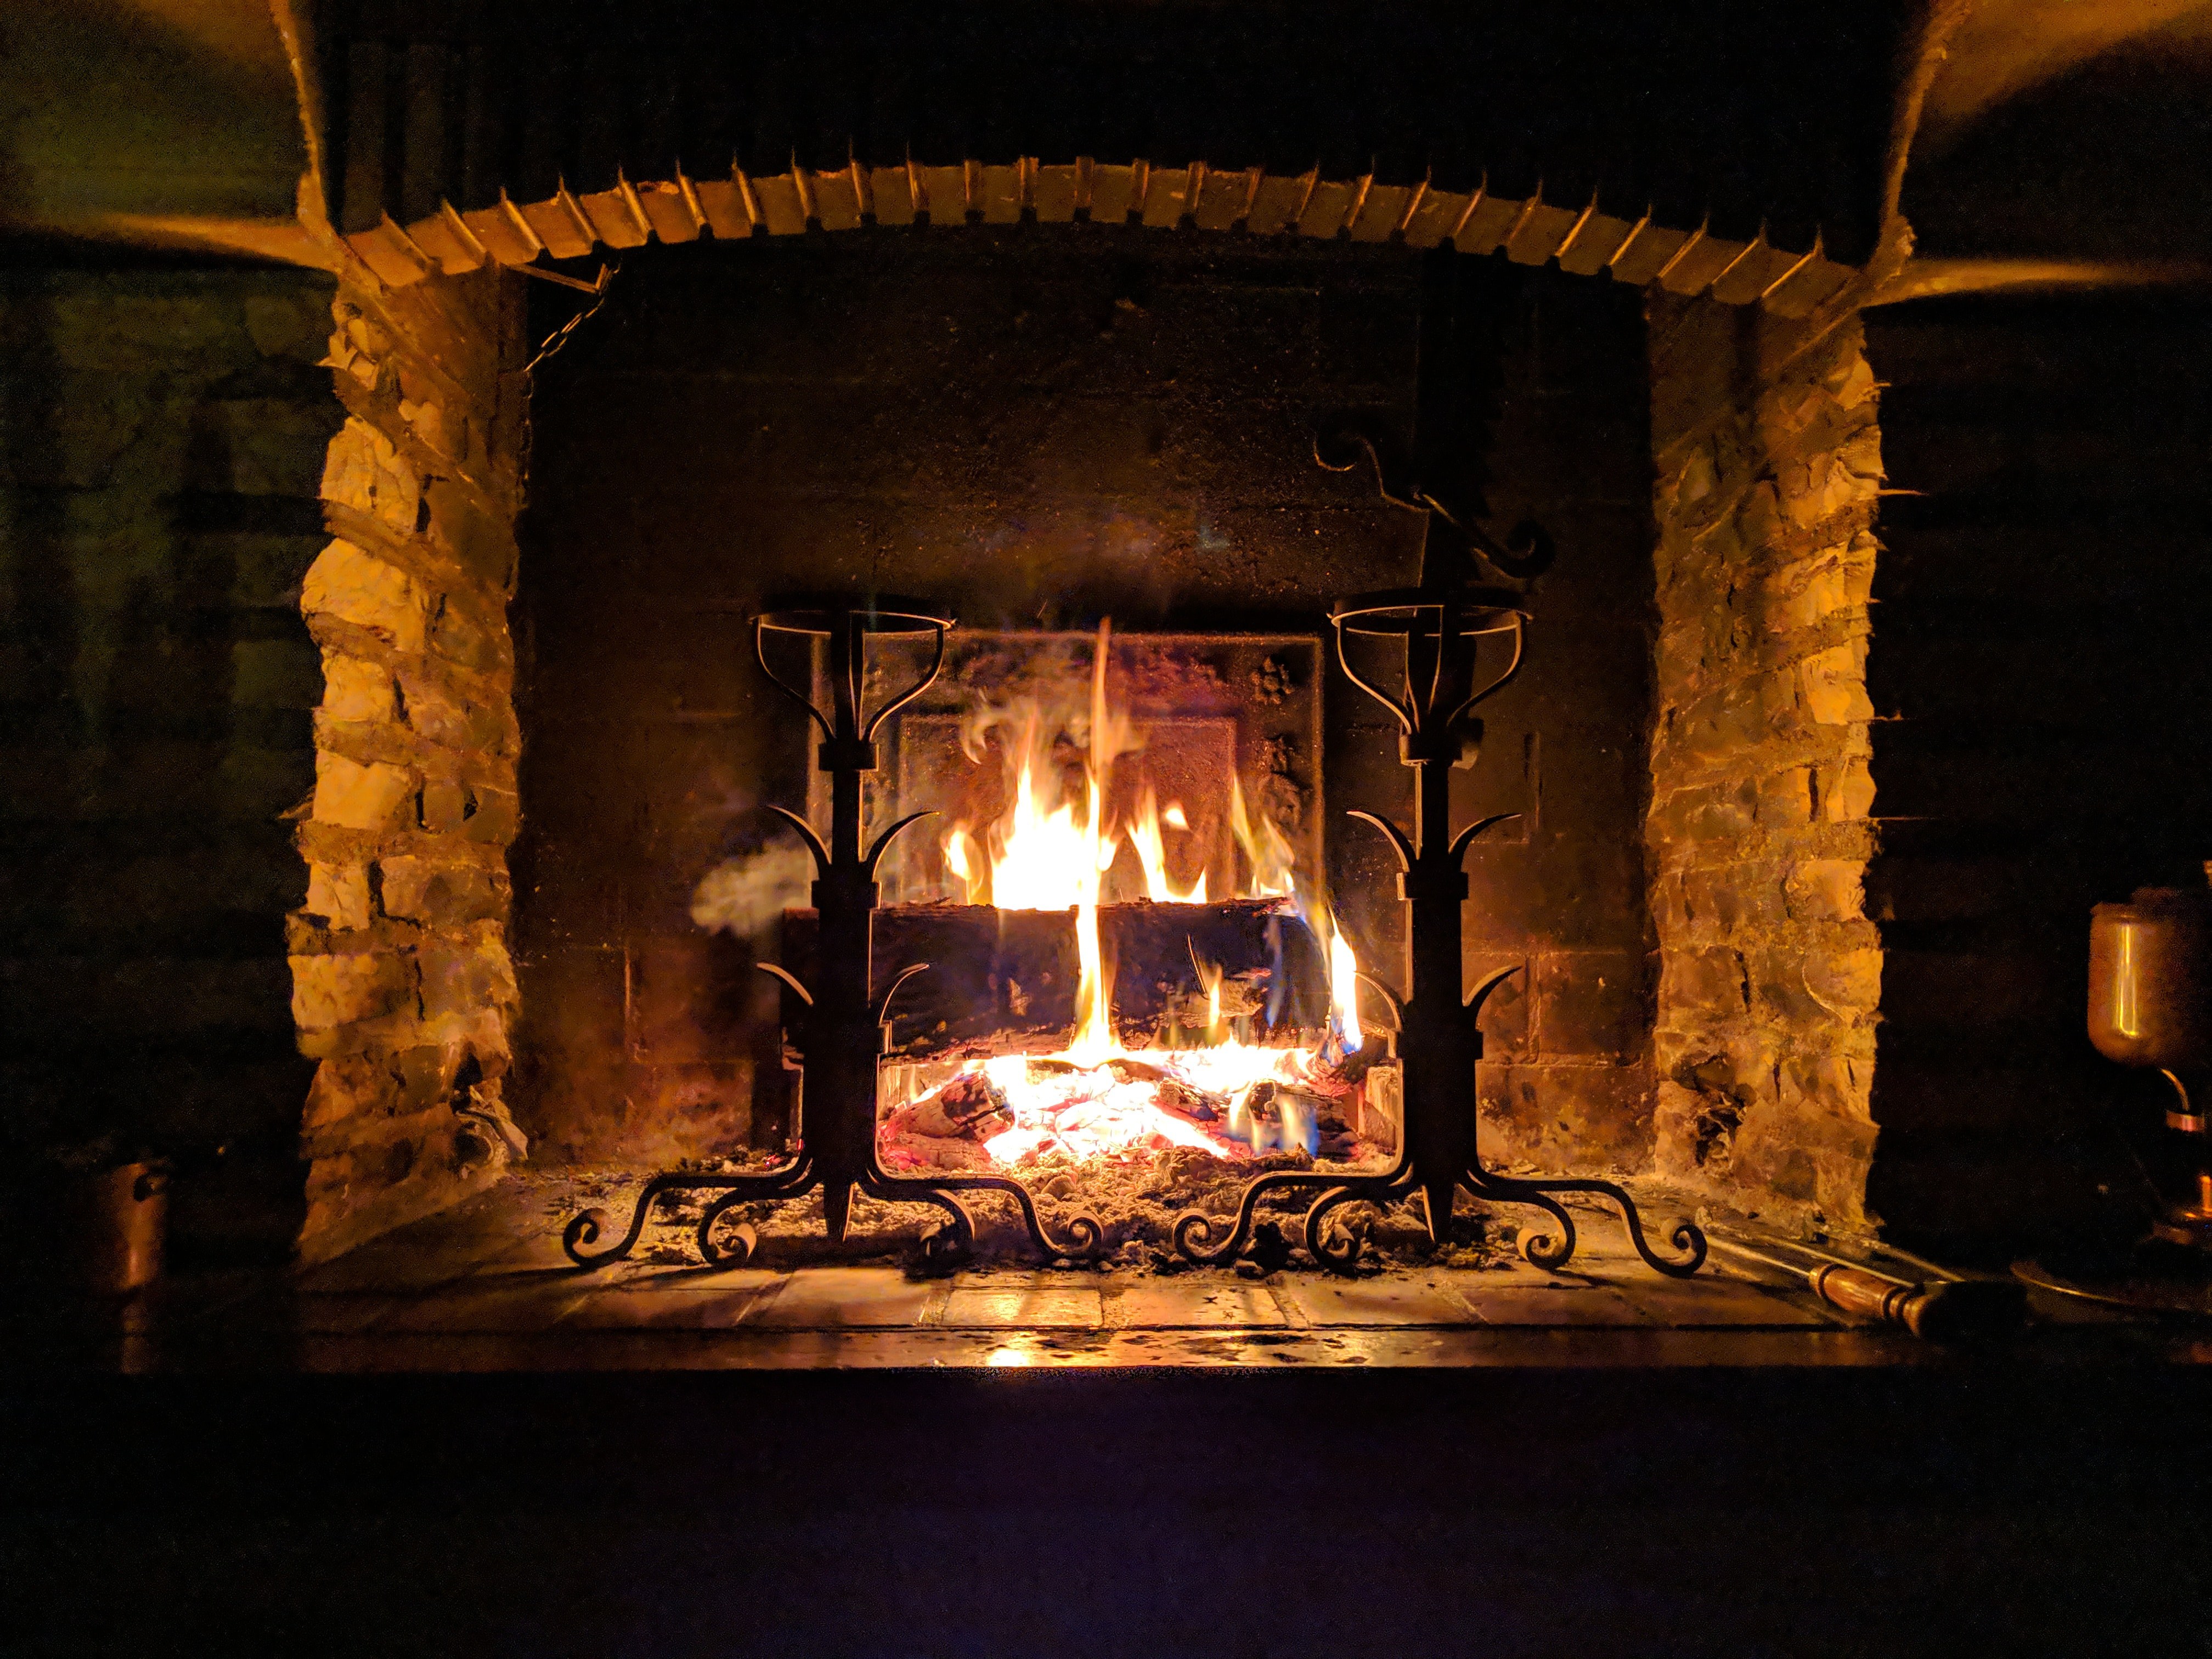 Winter evenings by the fireplace: how to make it cosy and safe
